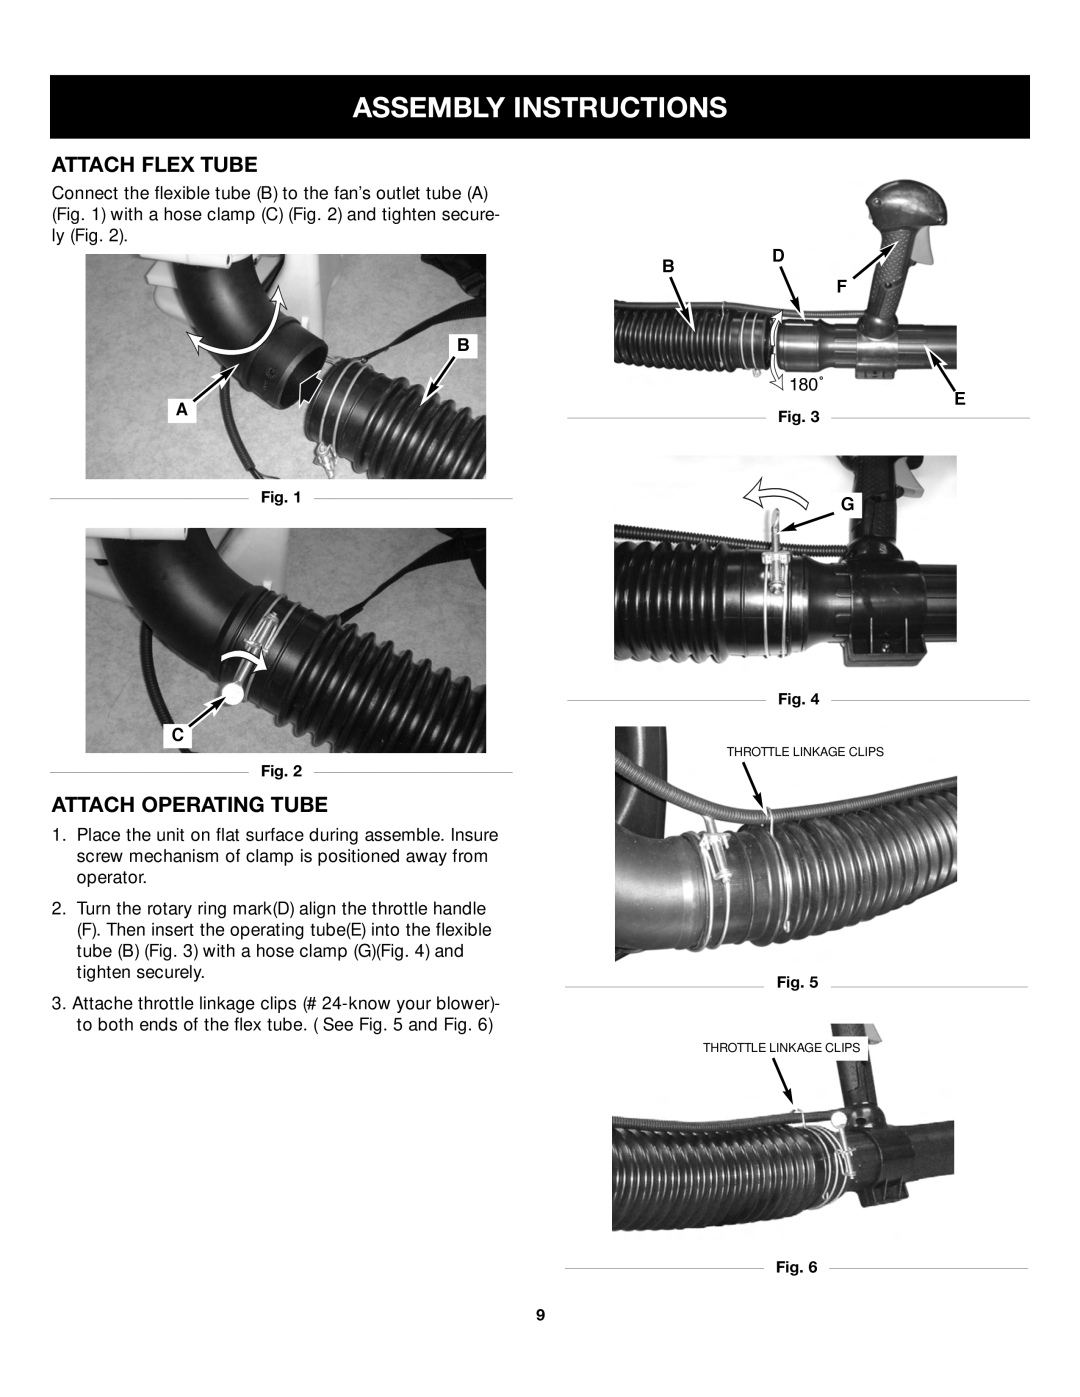 Craftsman 316.79499 manual Assembly Instructions, Attach Flex Tube, Attach Operating Tube, 180˚ 